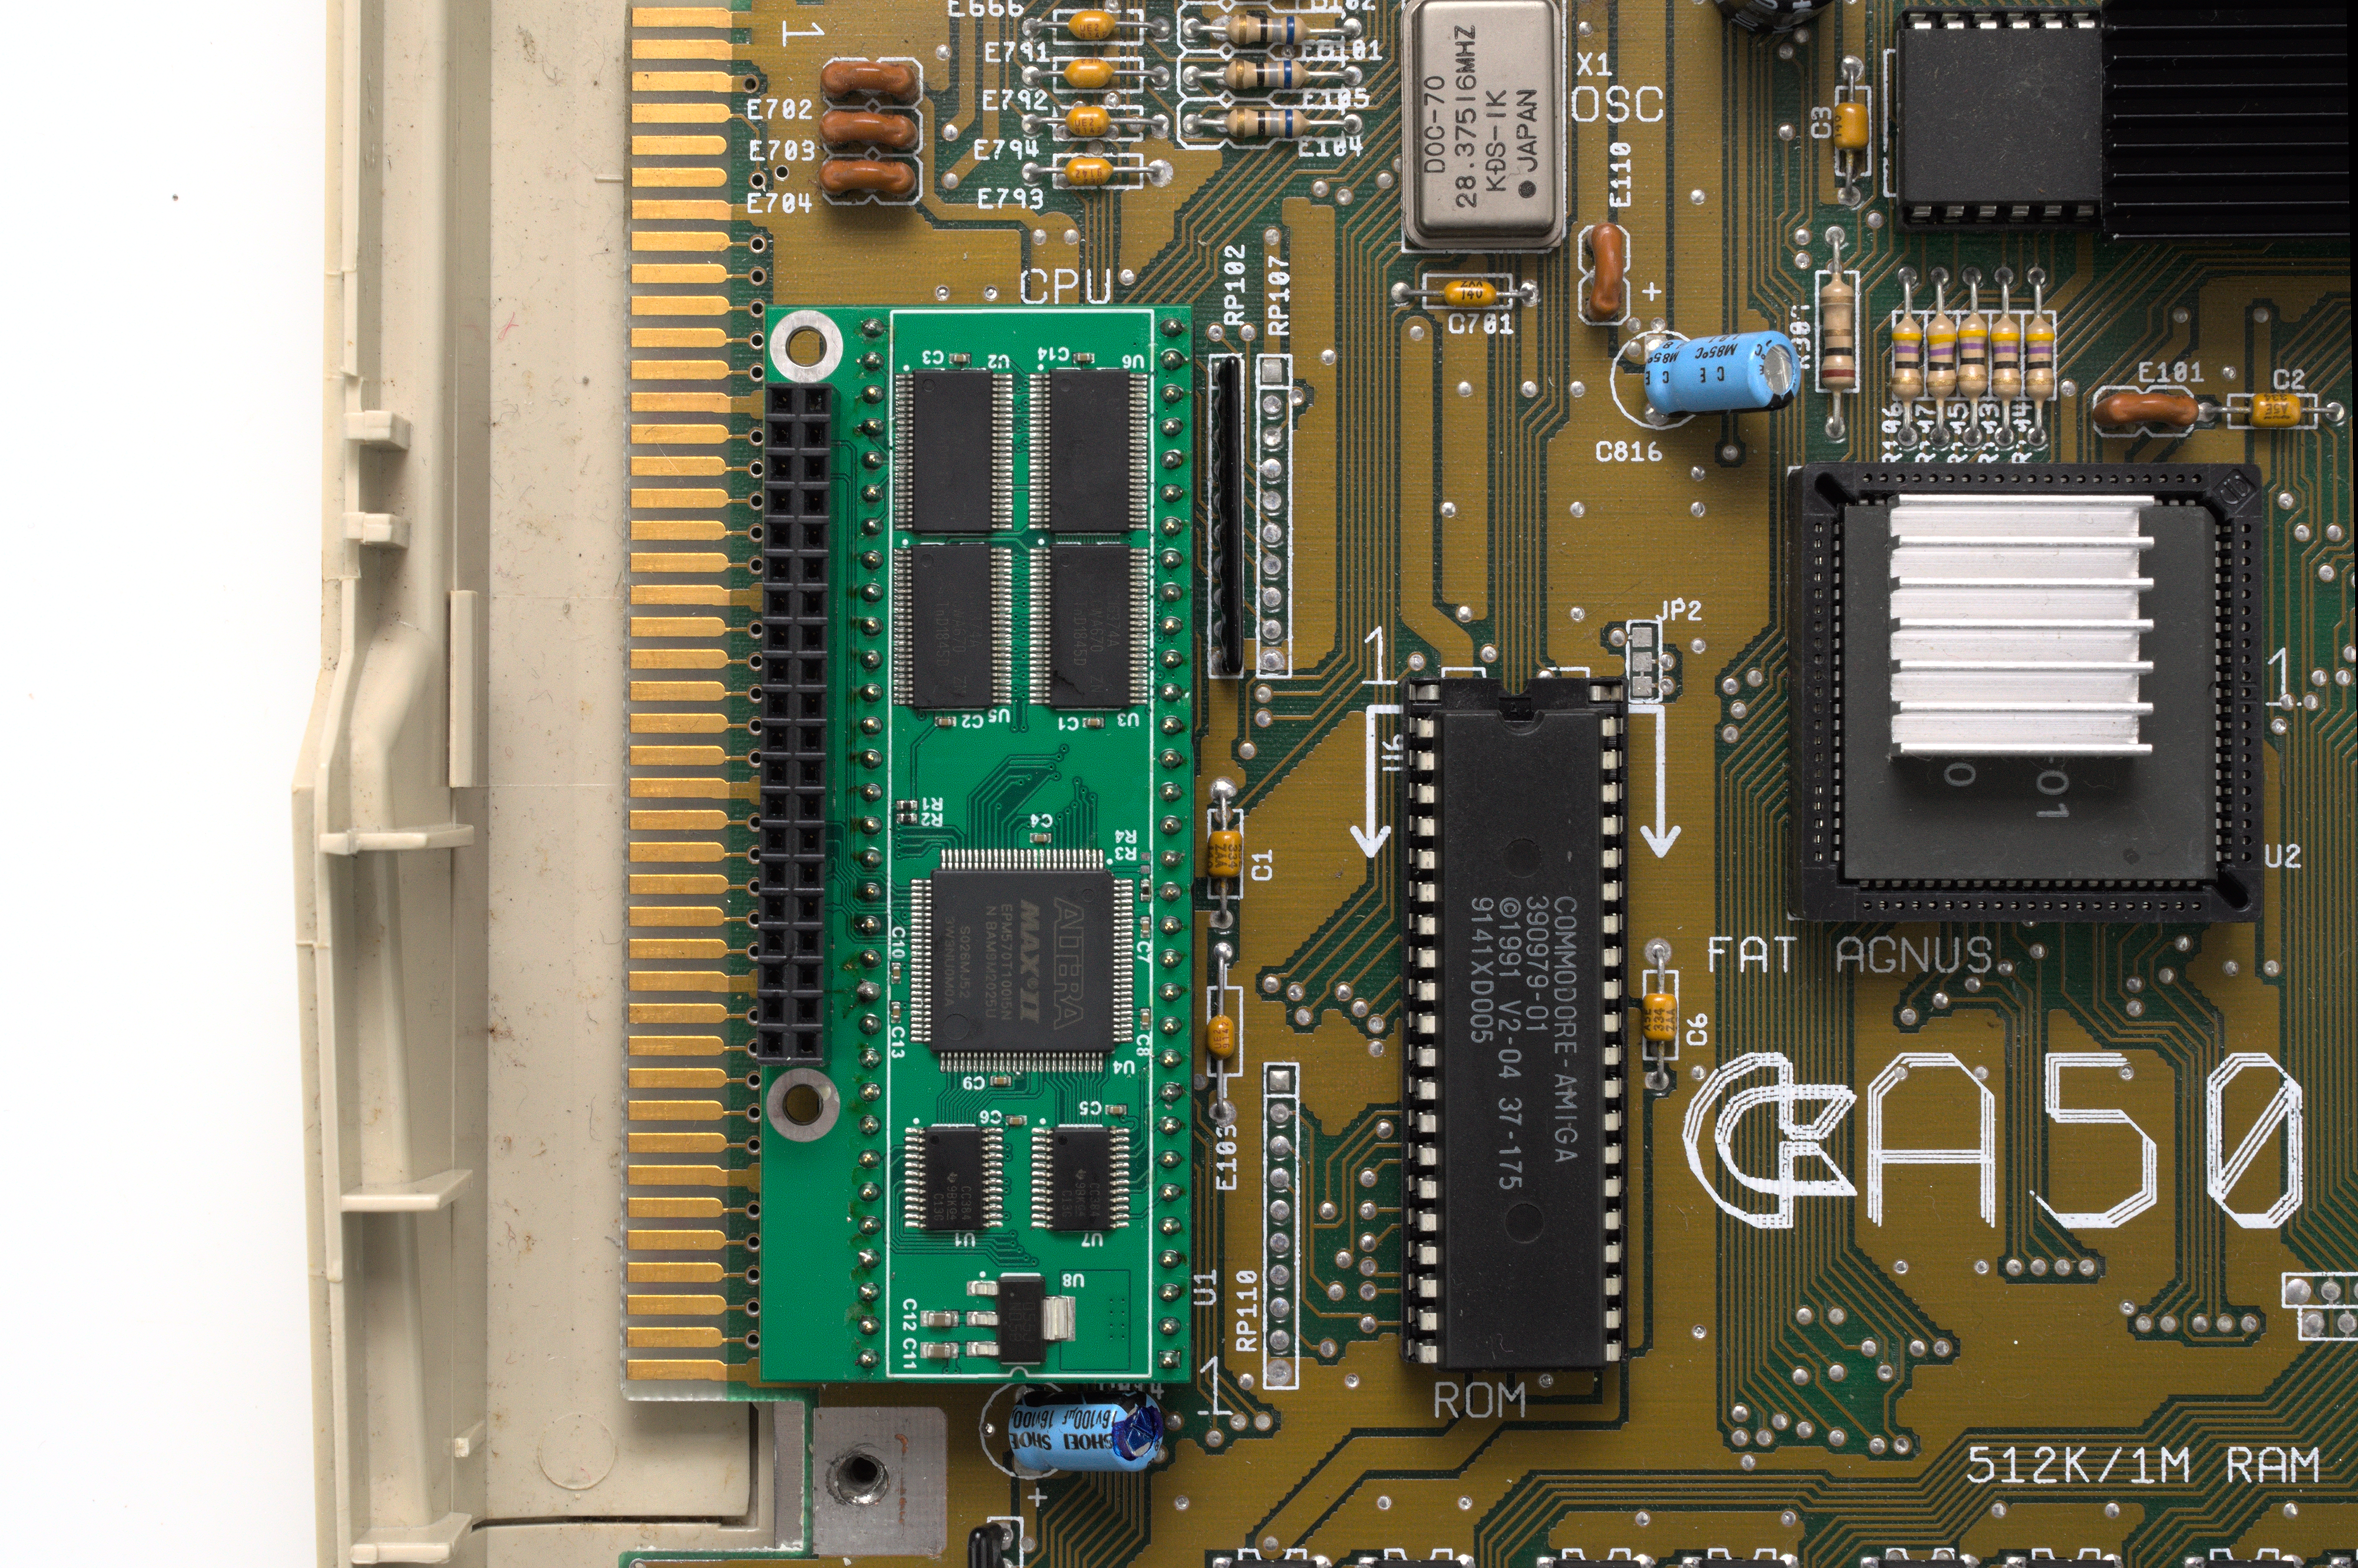 The PiStorm nestles in an Amiga’s CPU socket, with the stock processor removed